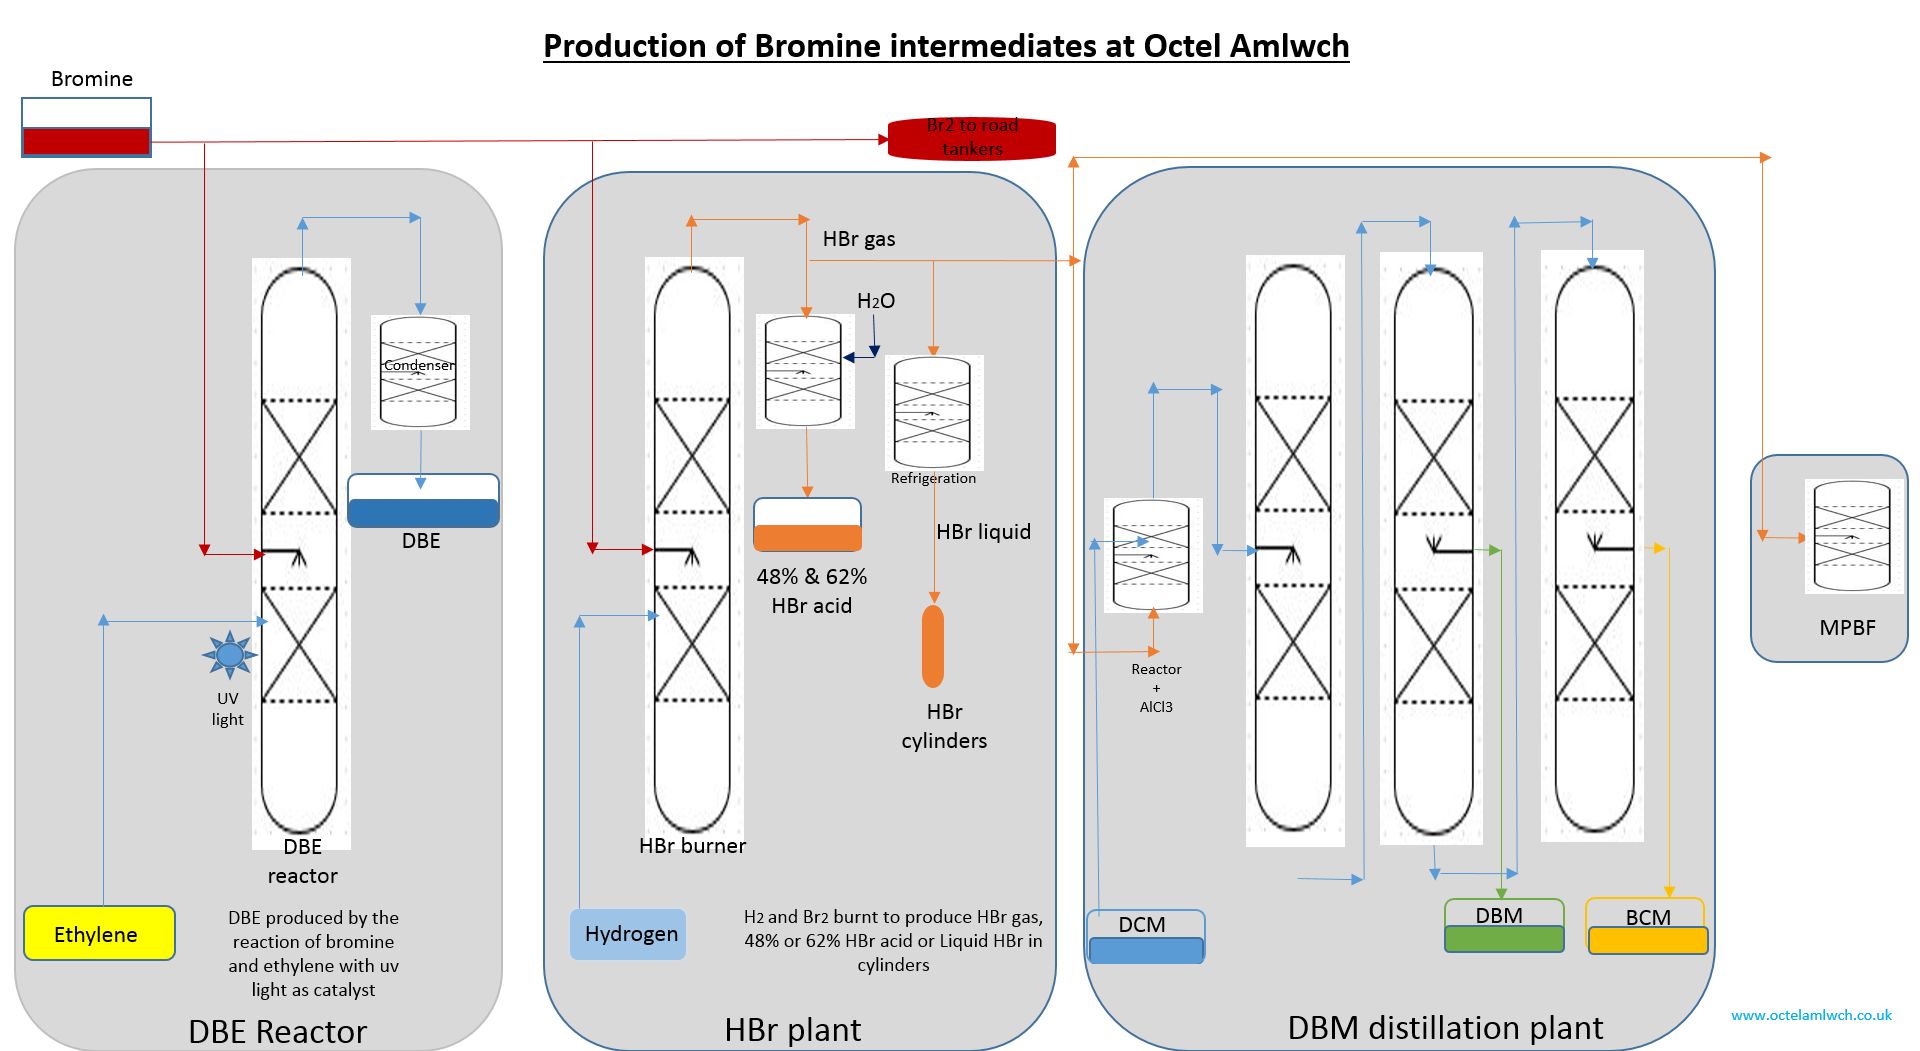 Production of bromine intermendiate at Octel Amlwch